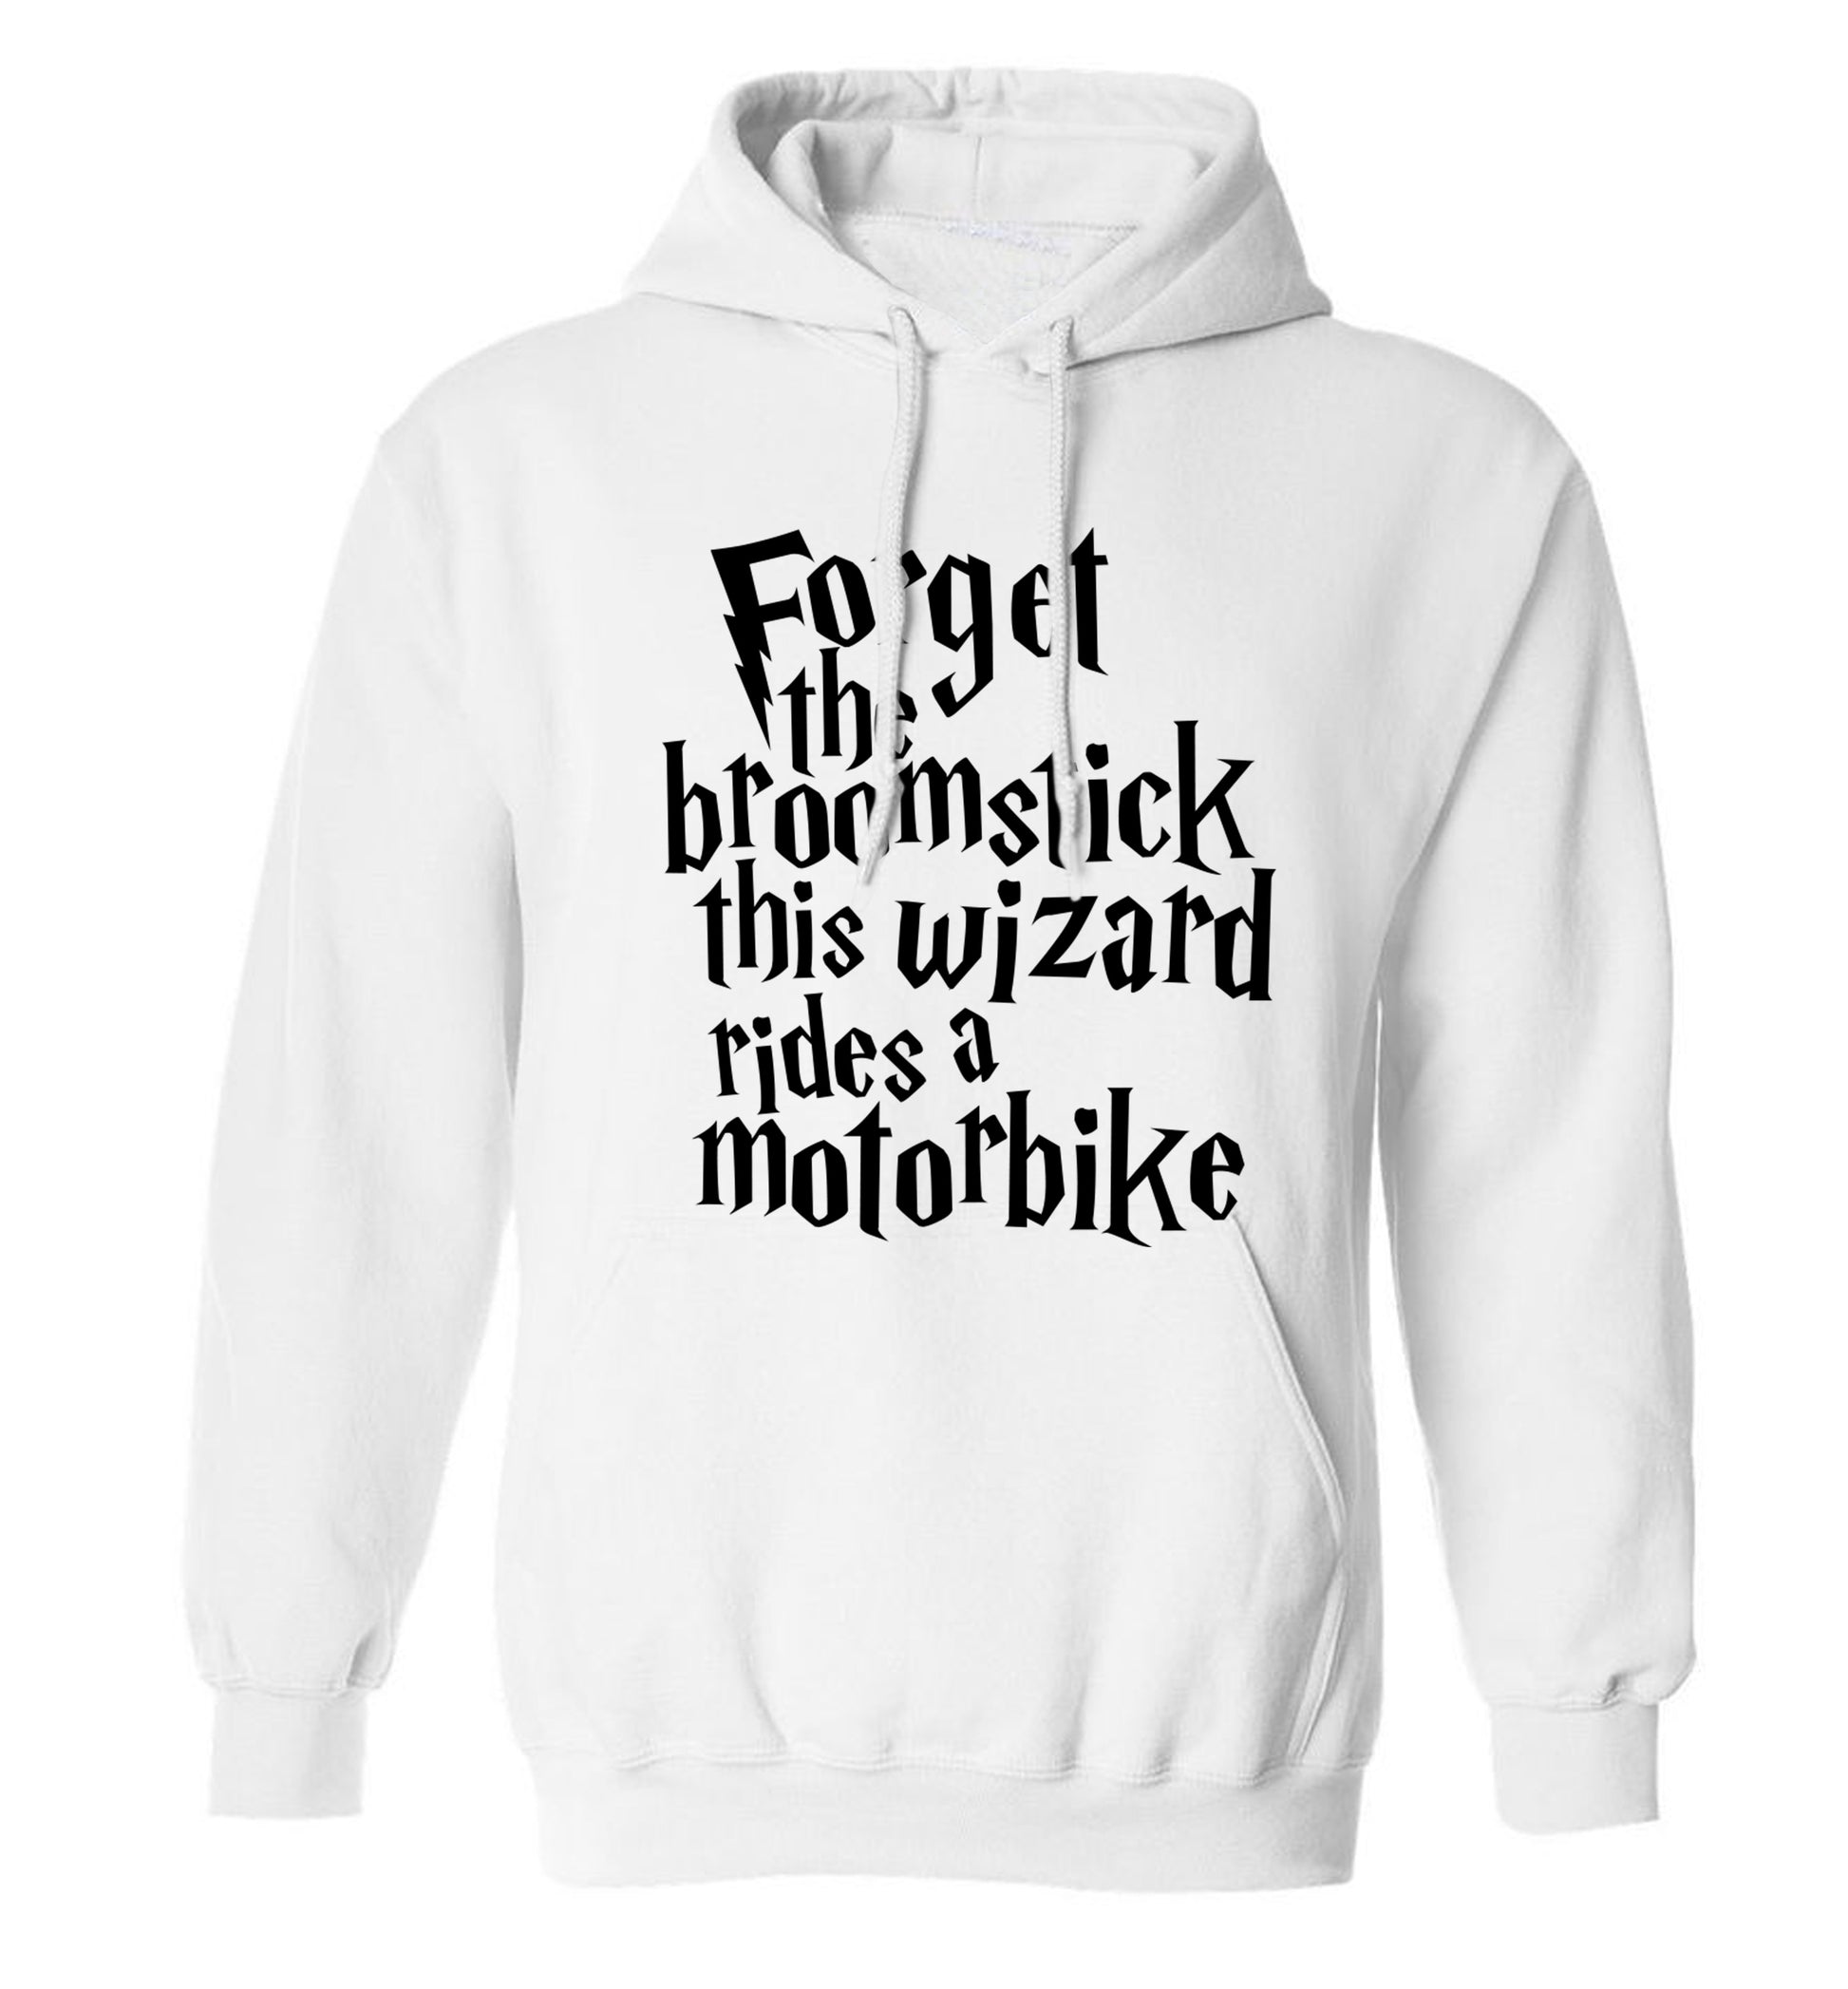 Forget the broomstick this wizard rides a motorbike adults unisexwhite hoodie 2XL